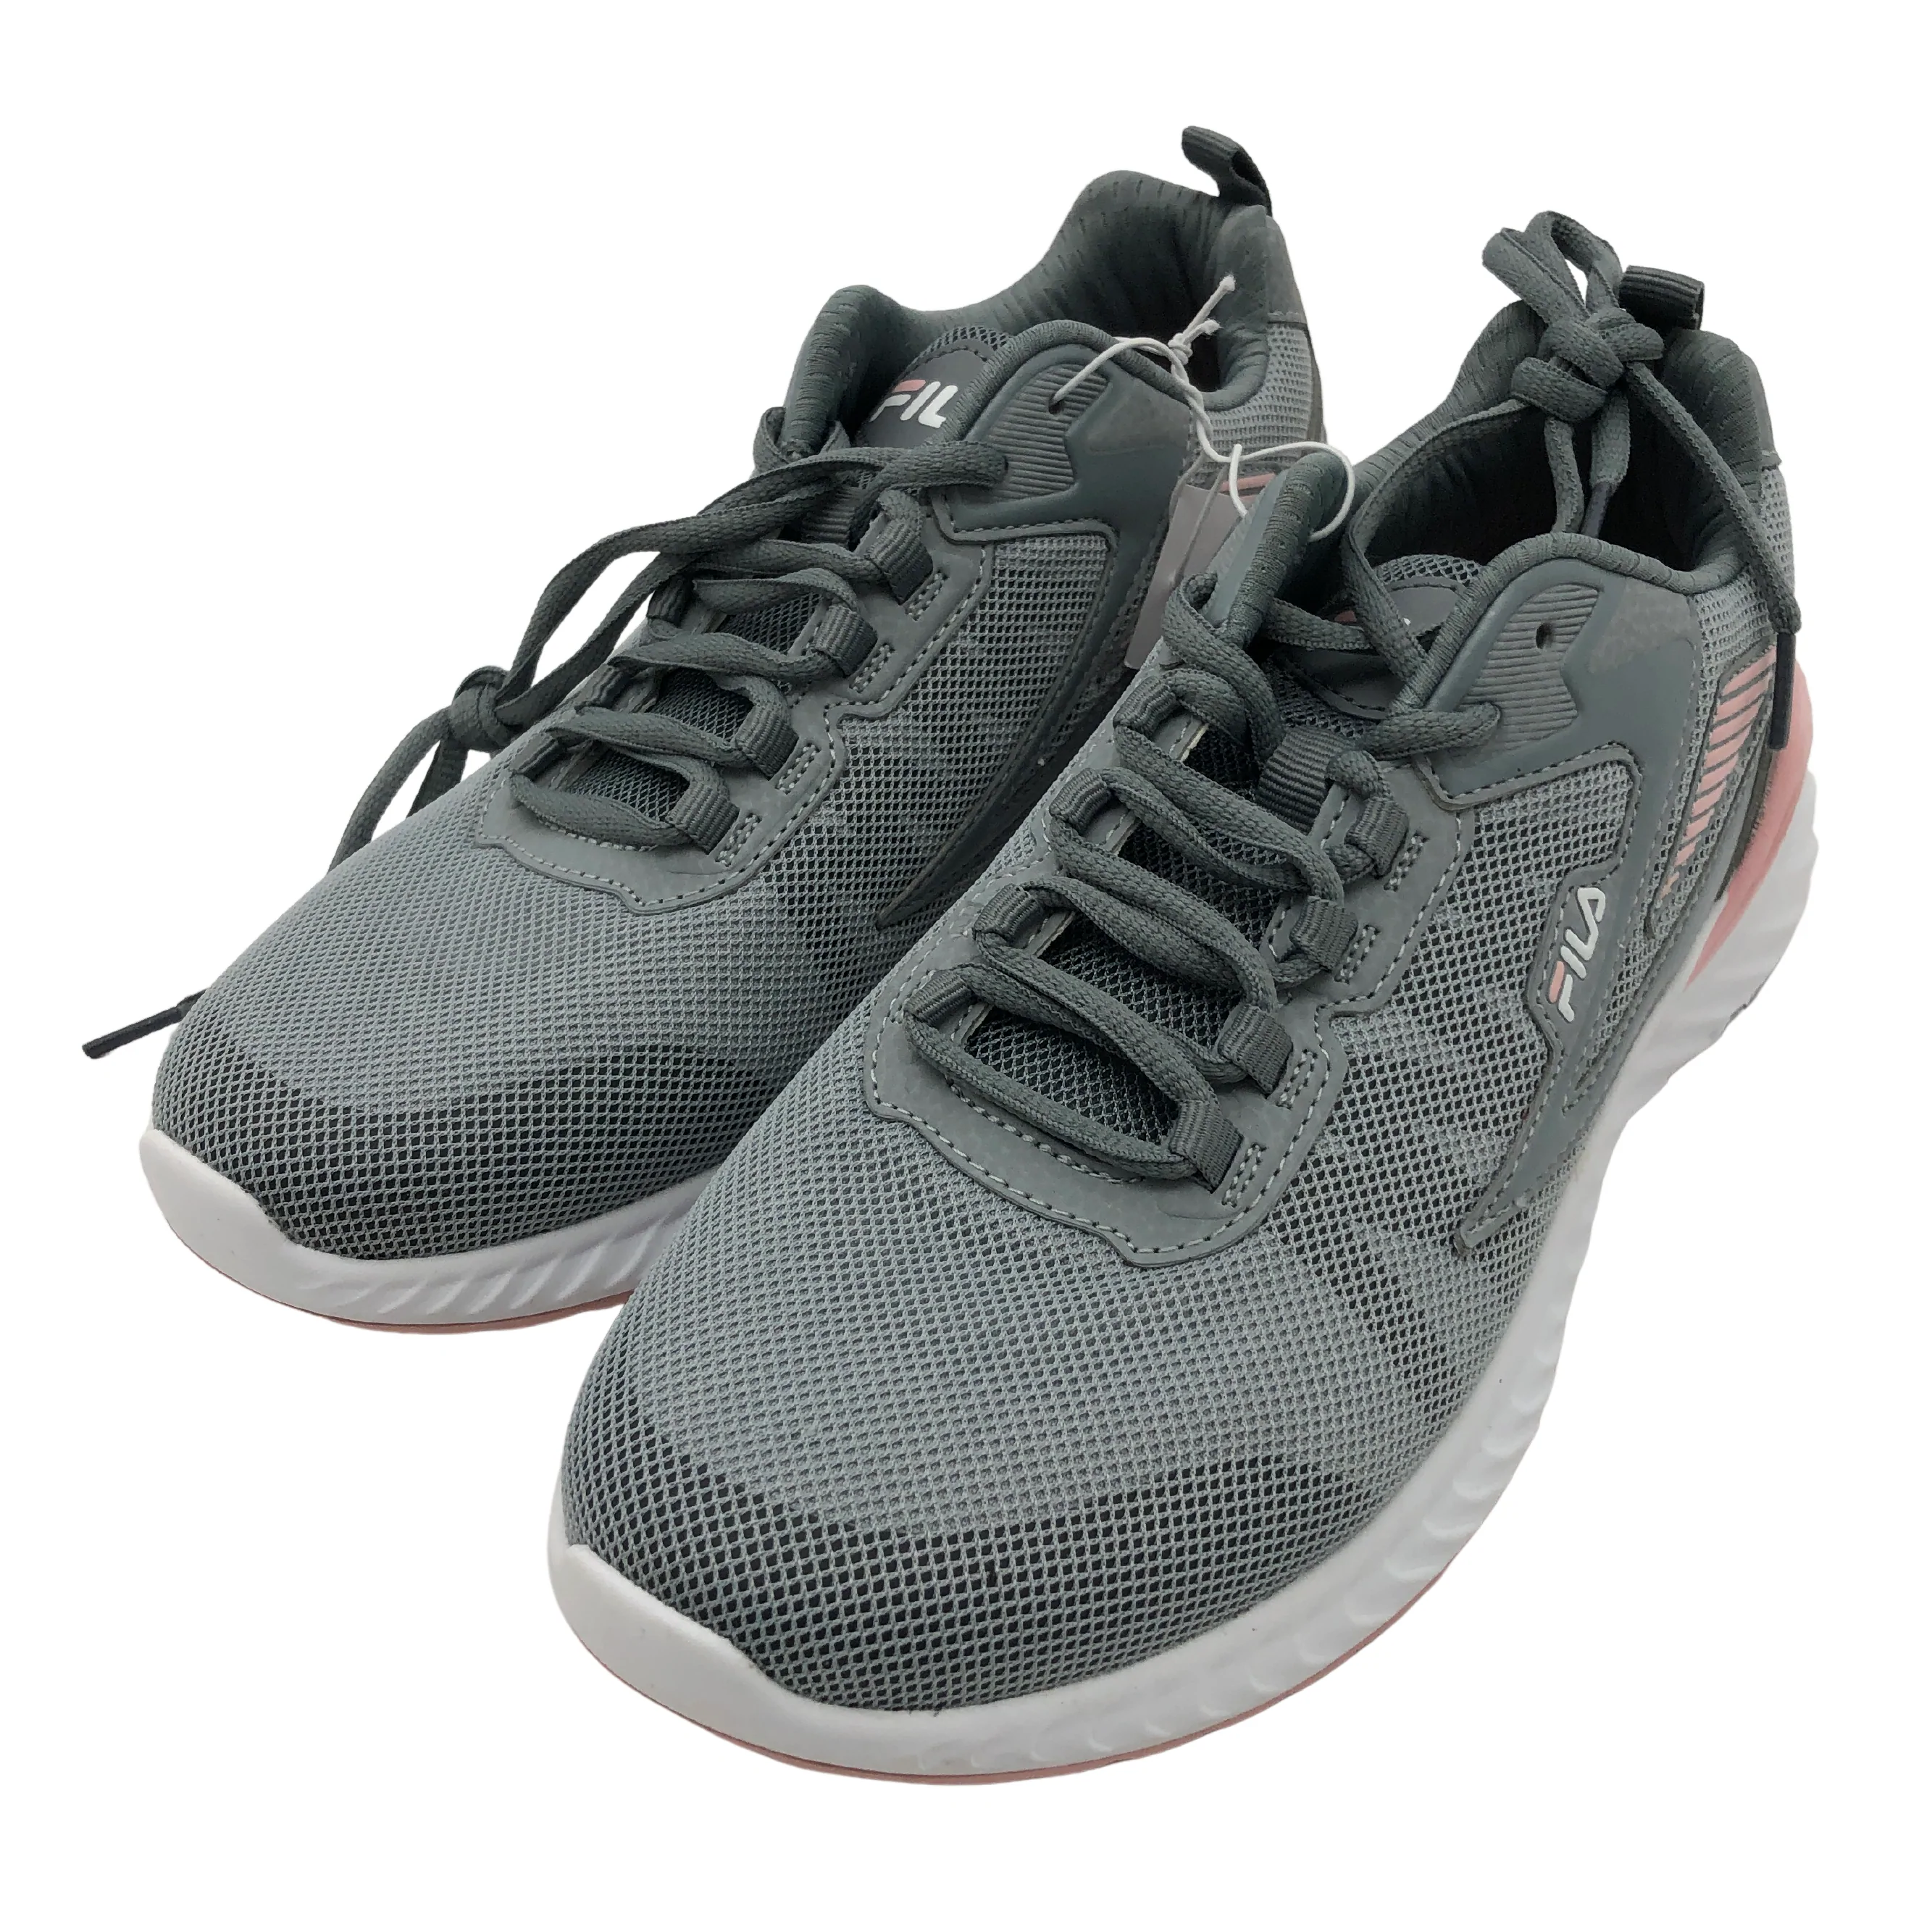 Fila Women's Running Shoes / Trazoros Energized 2 / Grey with Pink / Various Sizes